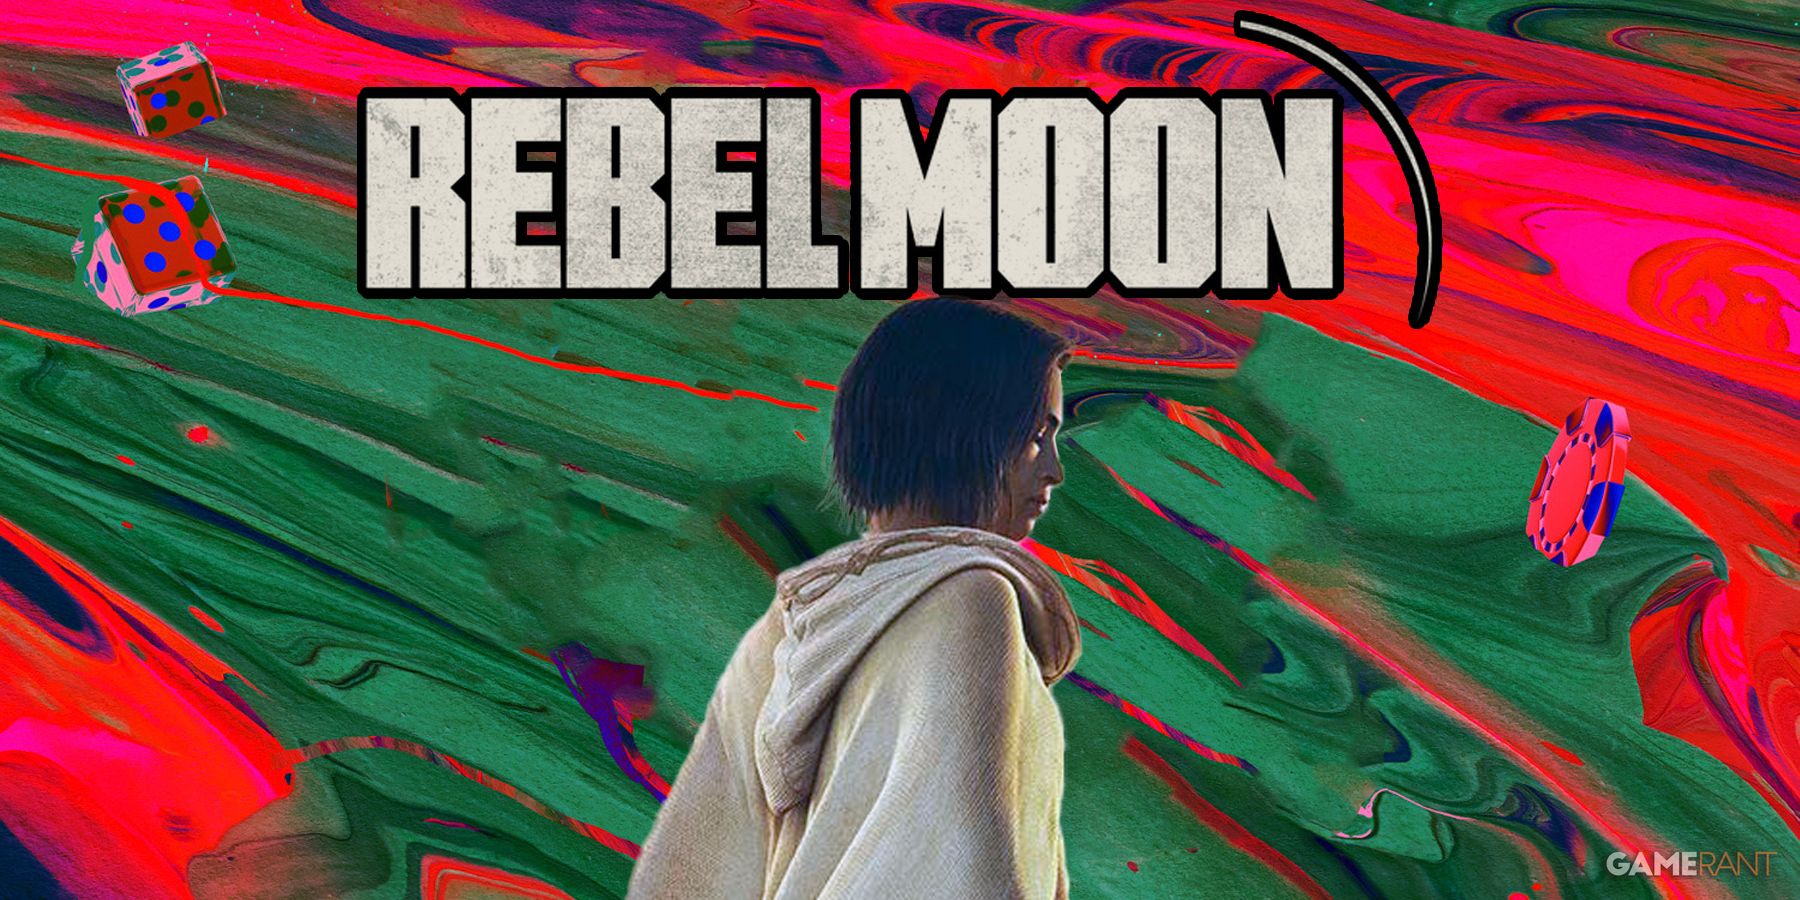 Zack Snyder Rebel Moon Army of the Dead shared universe